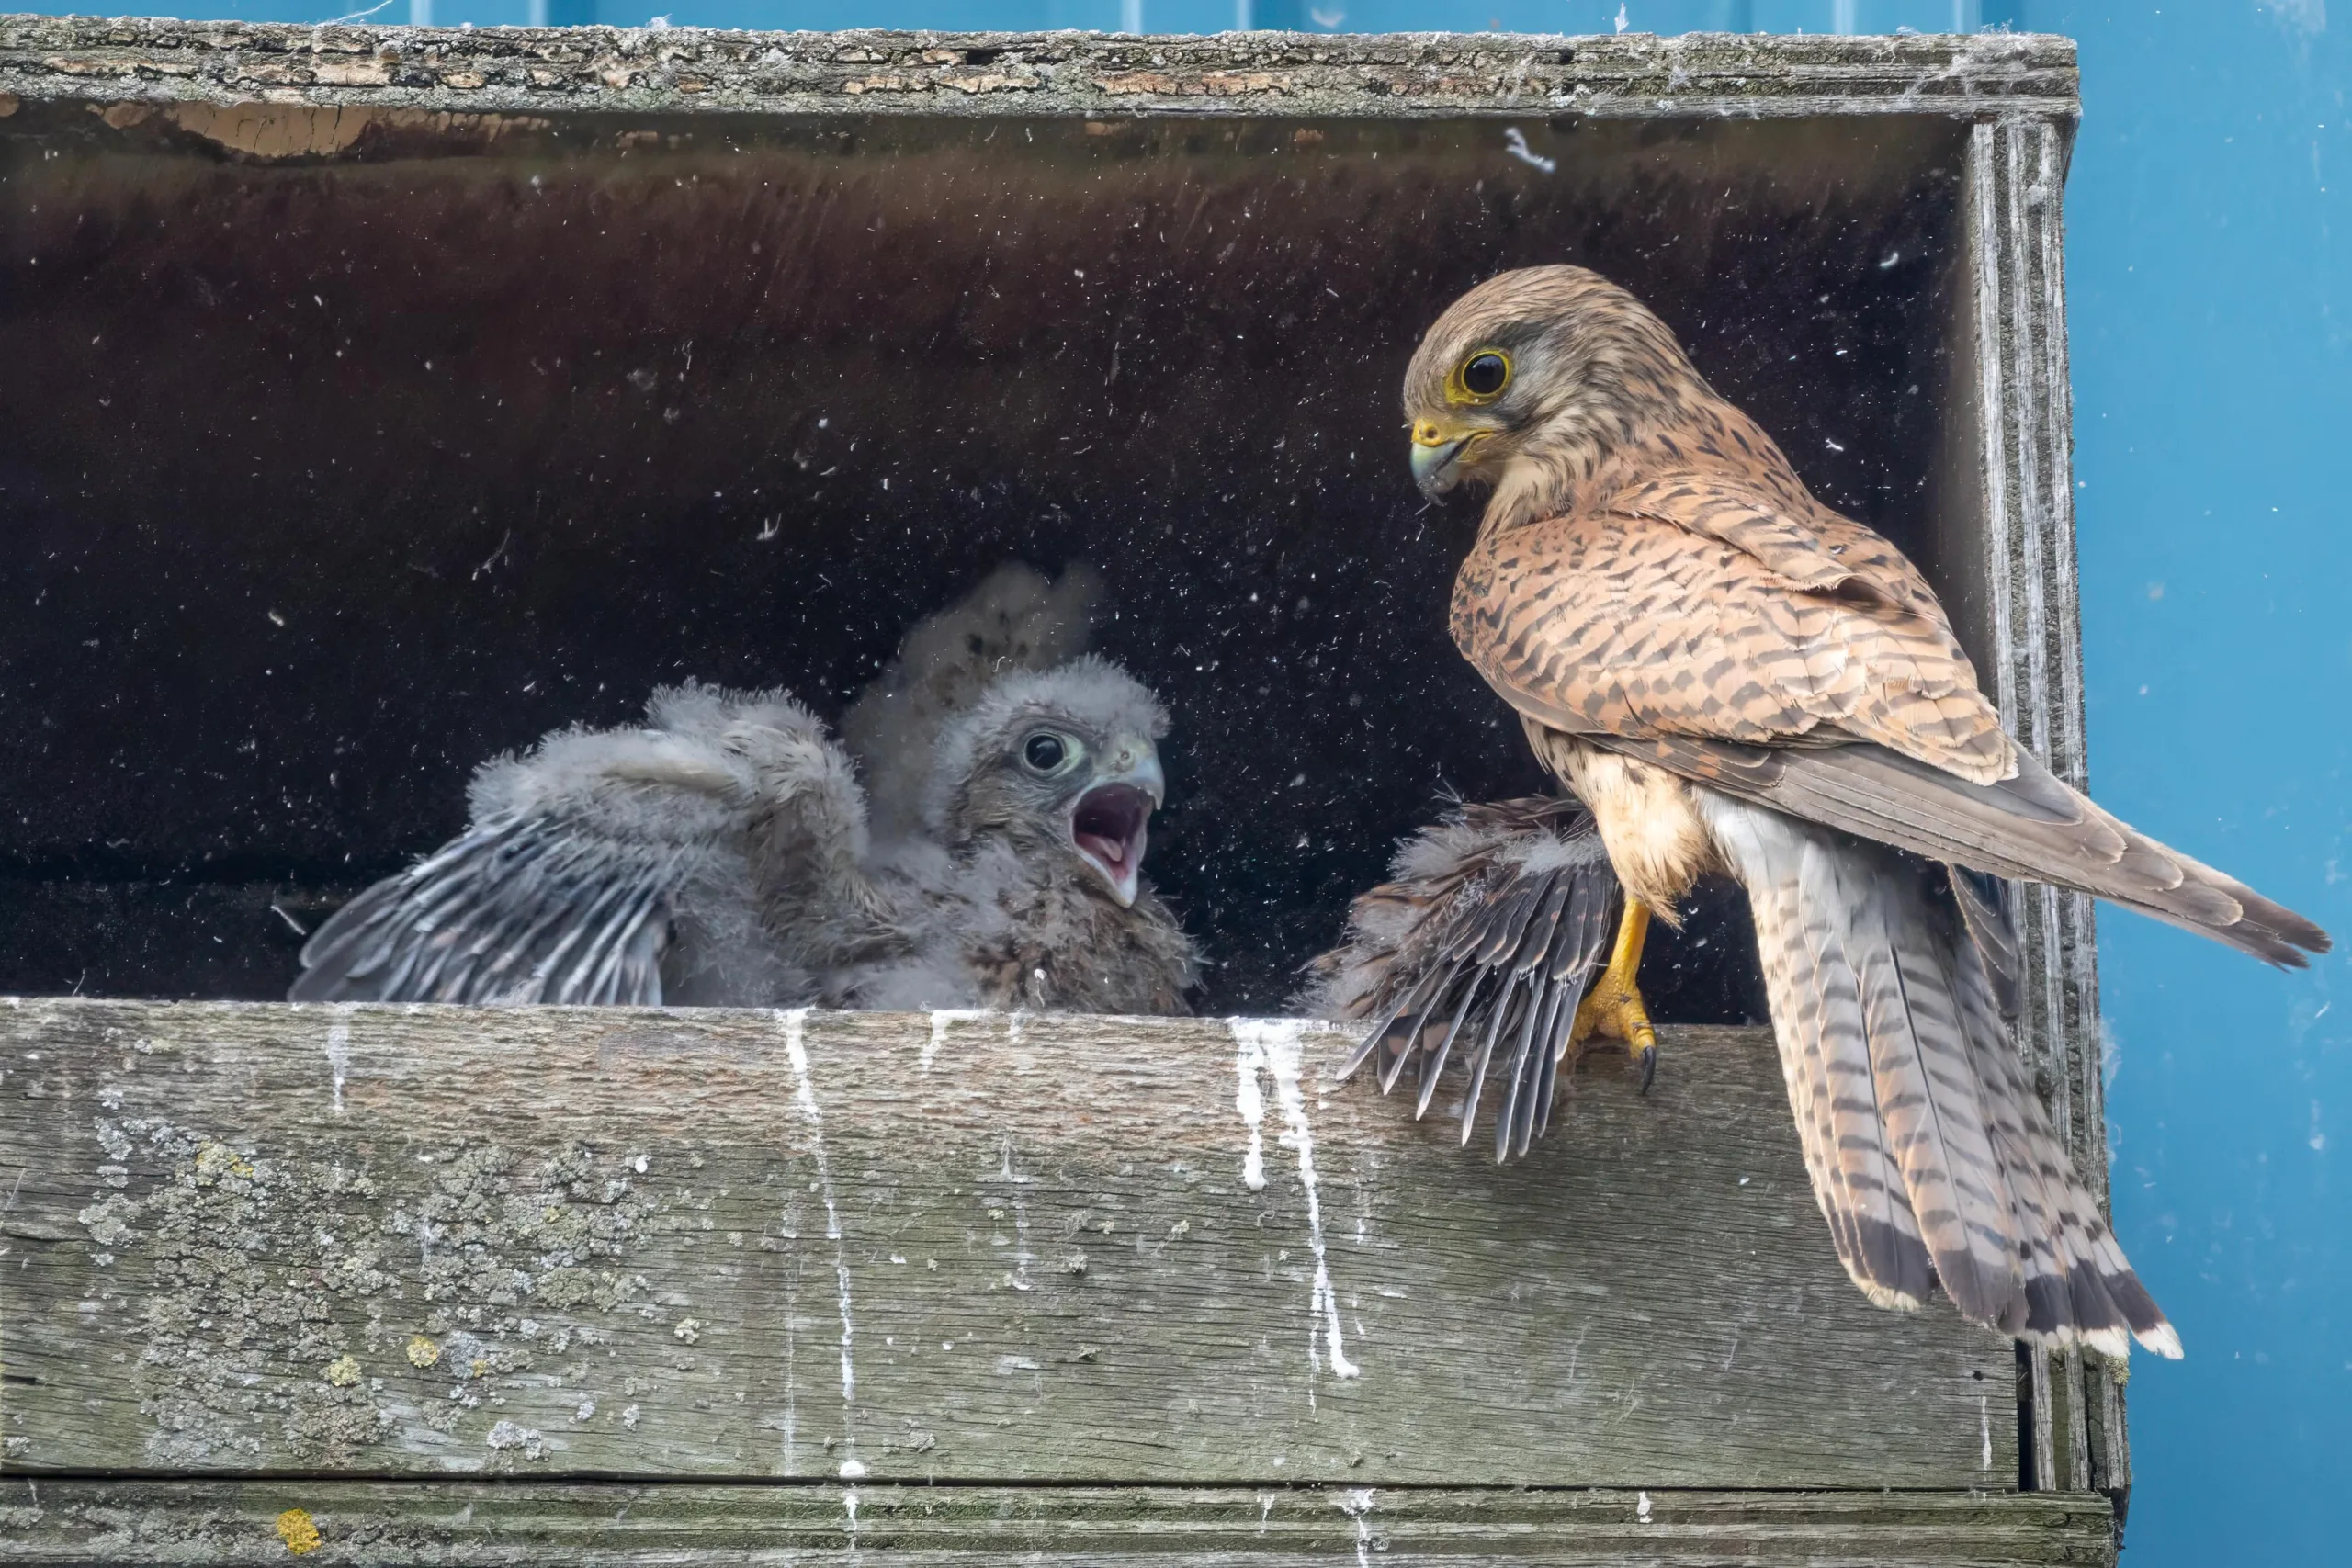 5 kestrel chicks being raised by single parent in box on side of industrial unit., Wisbech